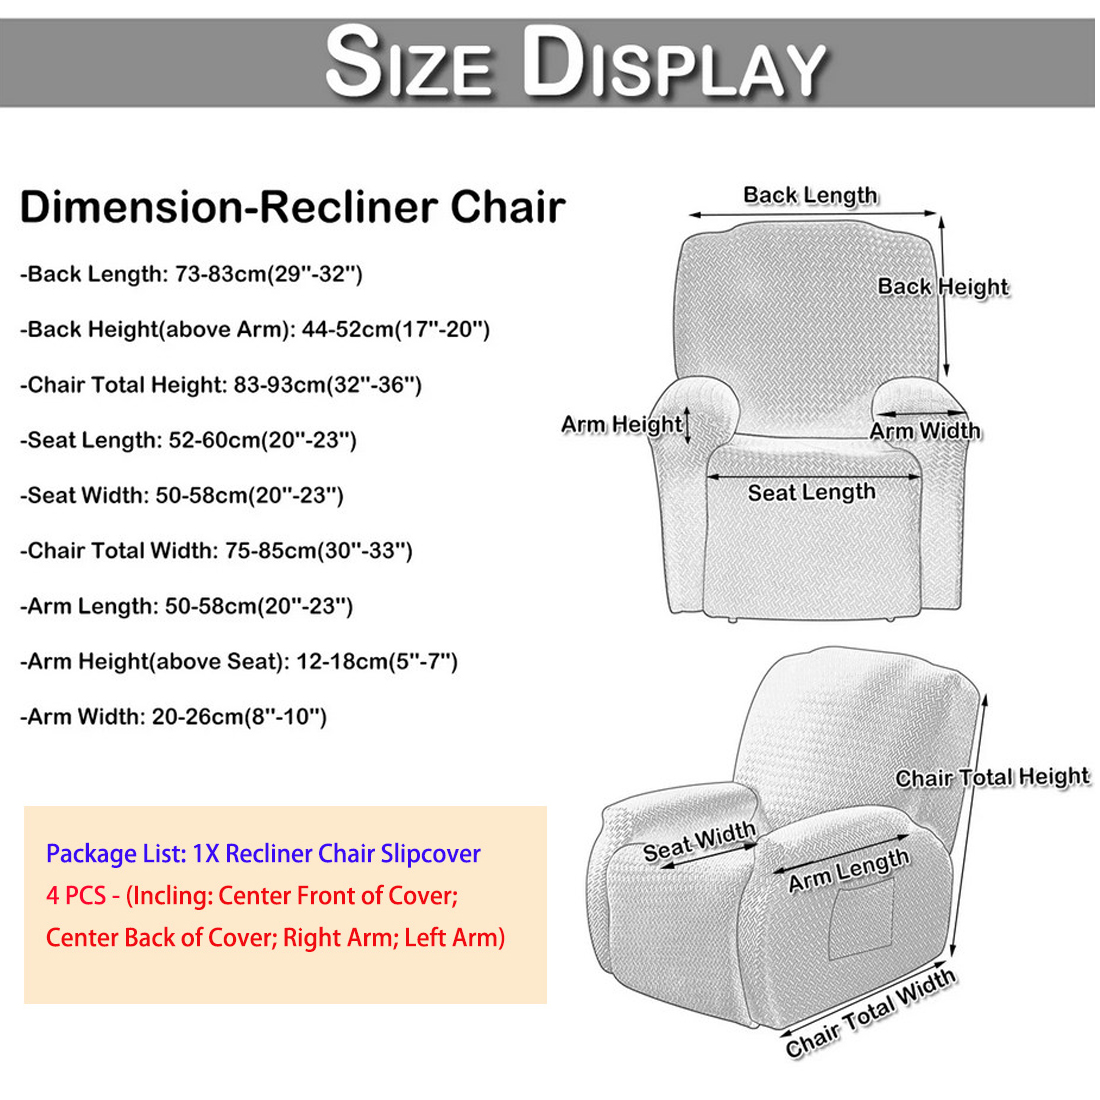 KBOOK Stretch Recliner Slipcover Chair Cover Solid Elastic Furniture Protector Home Decor(4 pcs) - image 3 of 5